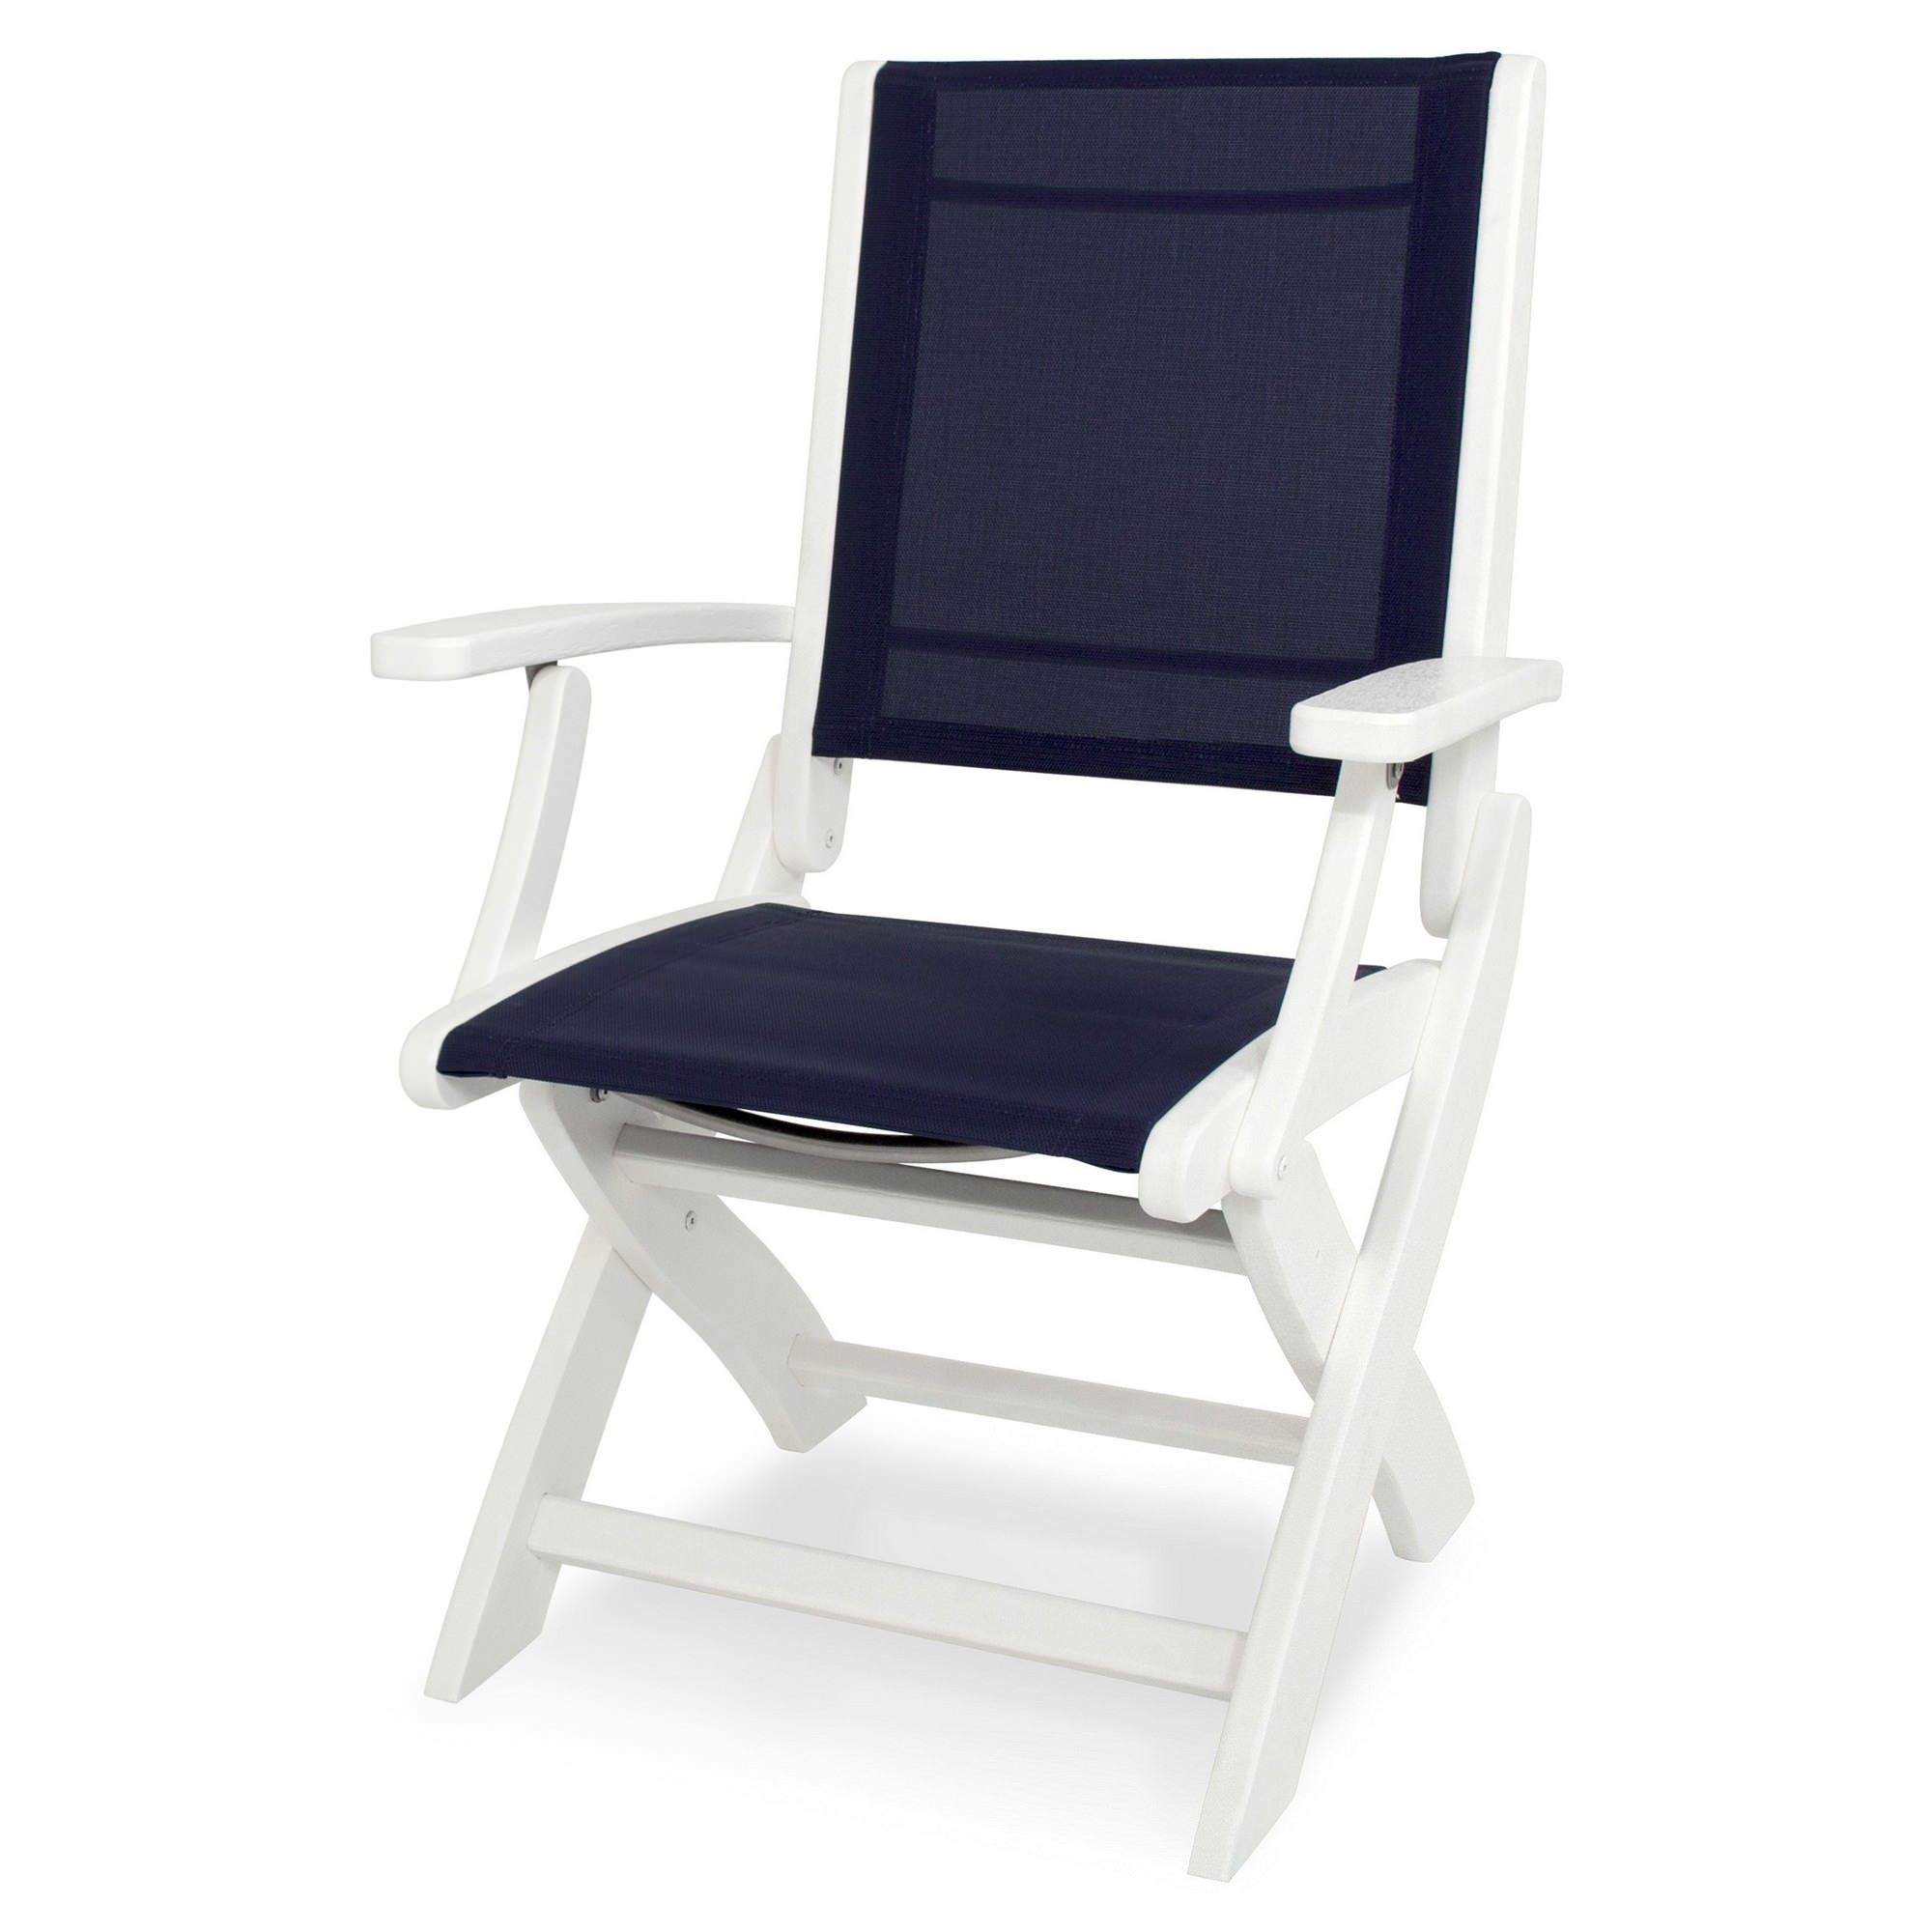 Polywood Coastal Folding Chair With White And Navy Blue Sling